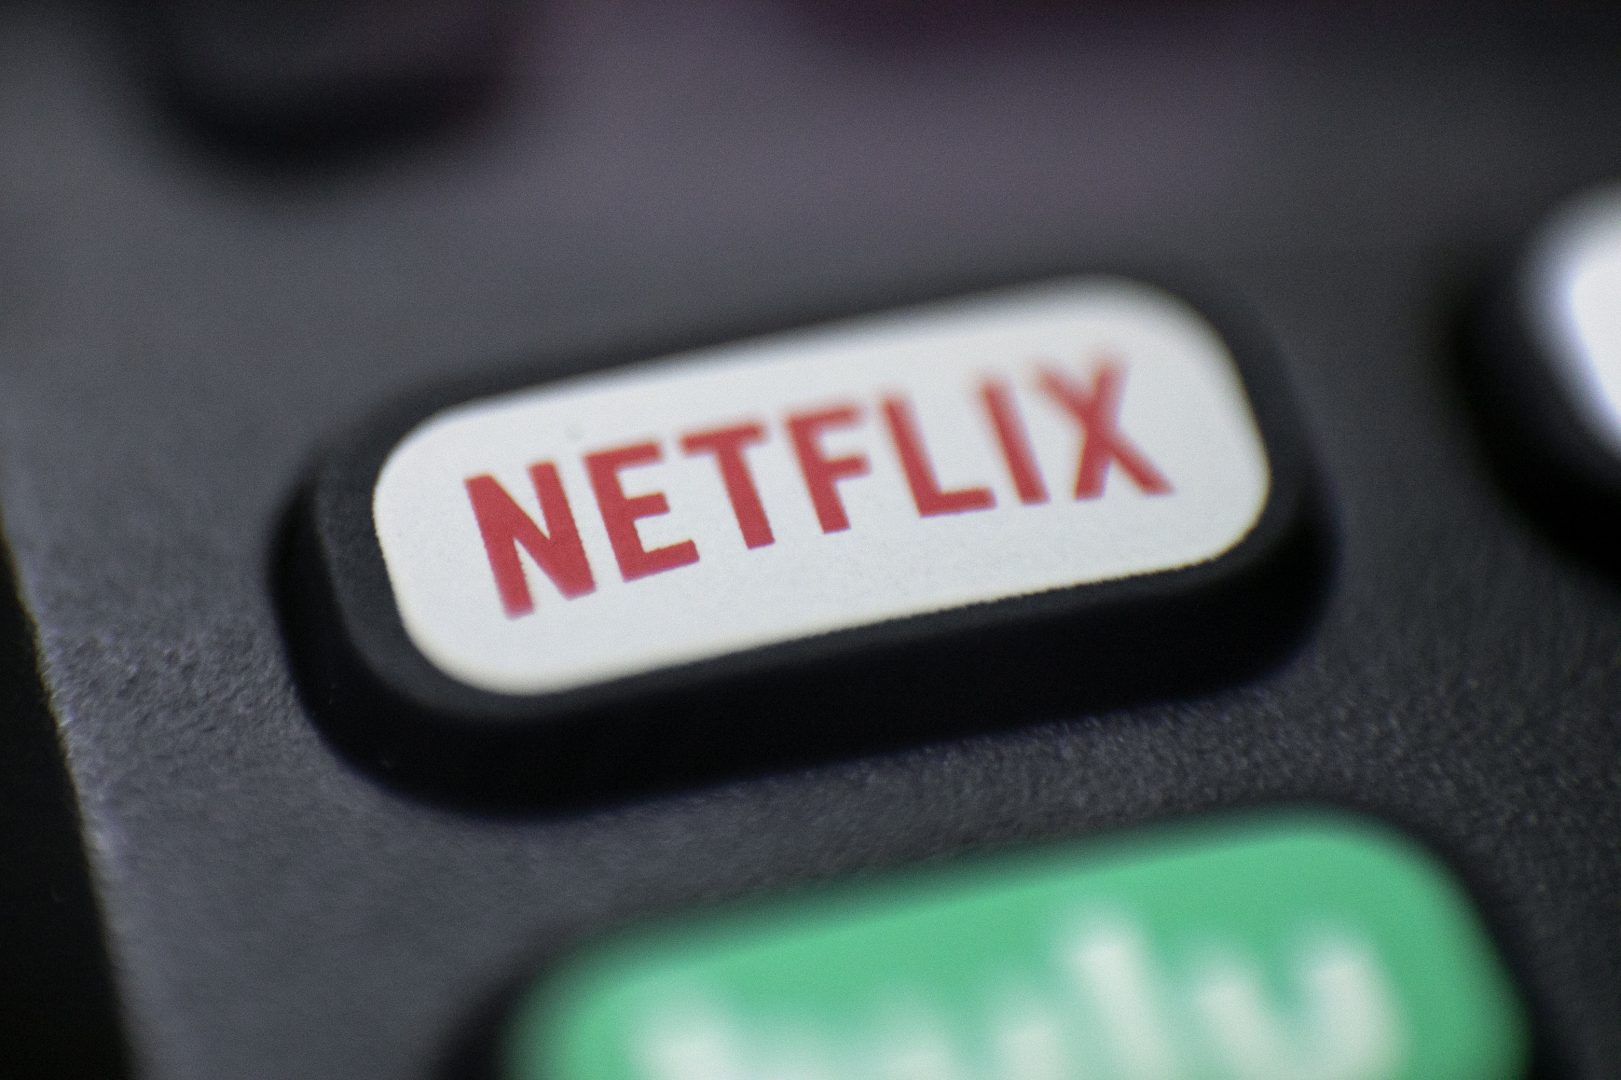 FILE - This Aug. 13, 2020 file photo shows a logo for Netflix on a remote control in Portland, Ore. Streaming services ranging from Netflix to Disney+ want us to stop sharing passwords. That's the new edict from the giants of streaming media, who hope to discourage the common practice of sharing account passwords without alienating their subscribers, who've grown accustomed to the hack.